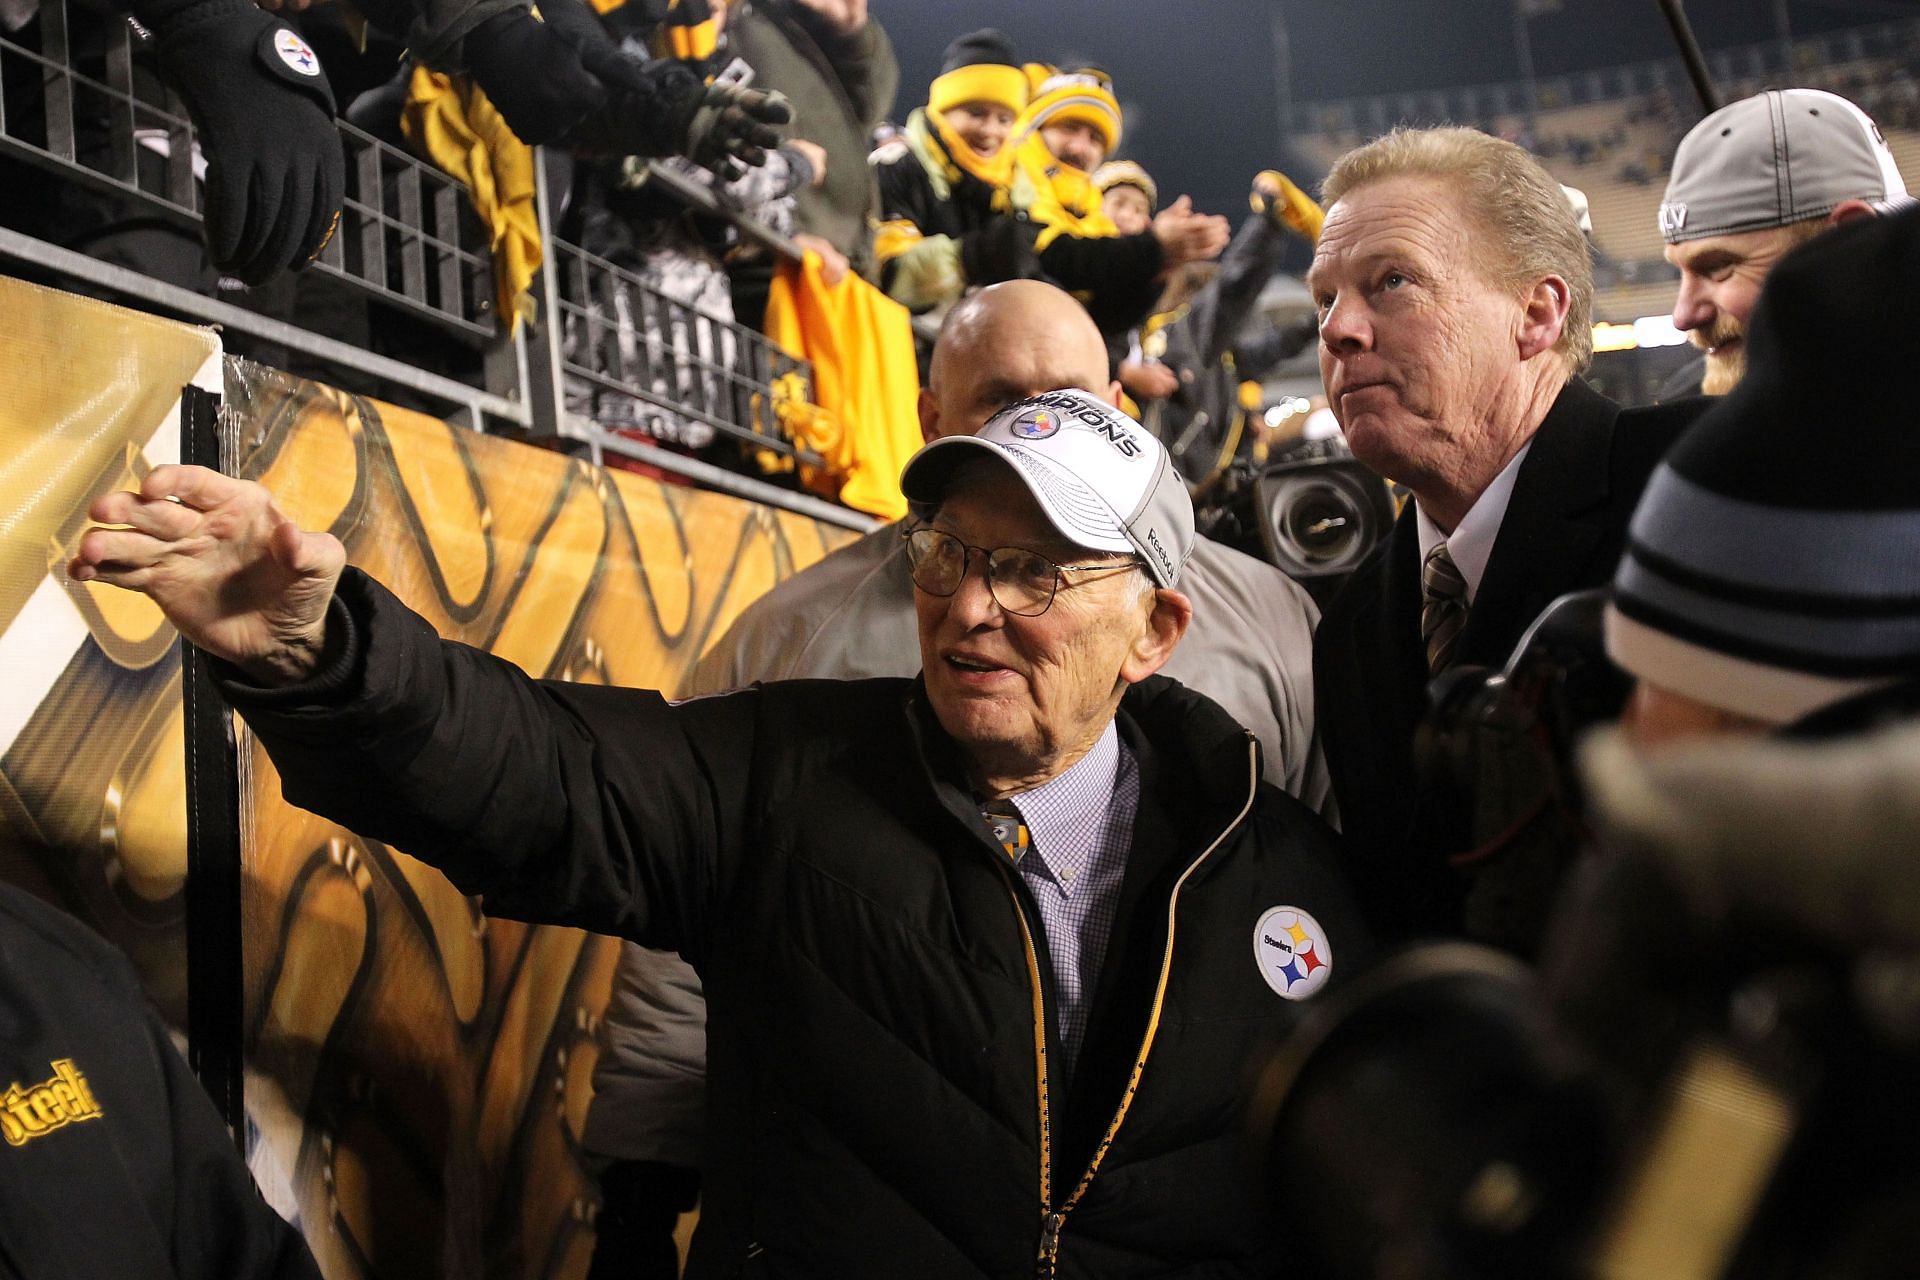 Dan Rooney, a previous owner of the Pittsburgh Steelers